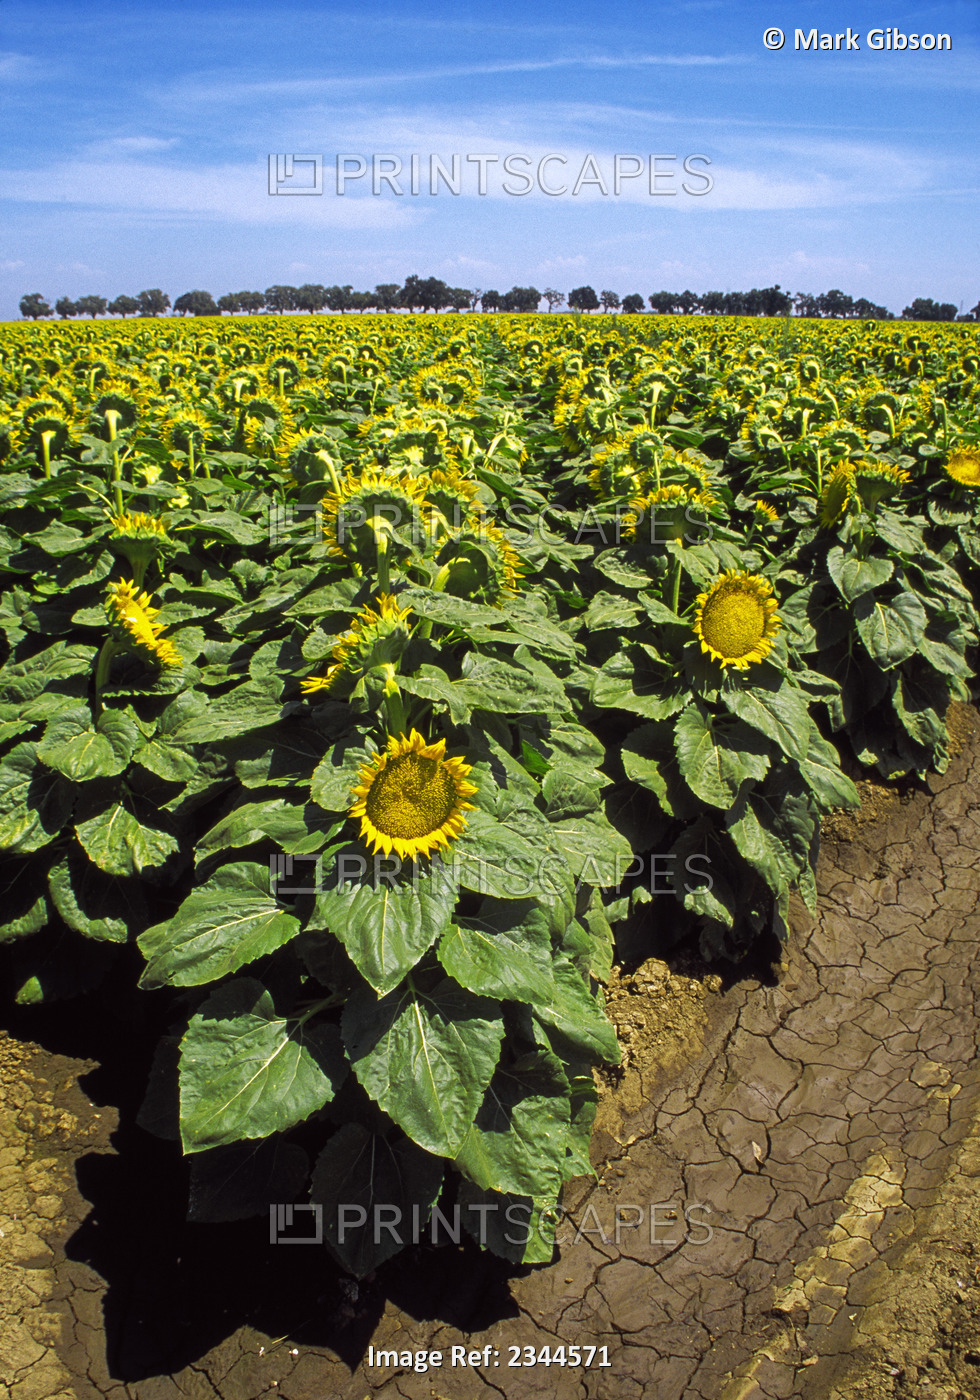 Agriculture - Field of maturing sunflowers / California, USA.